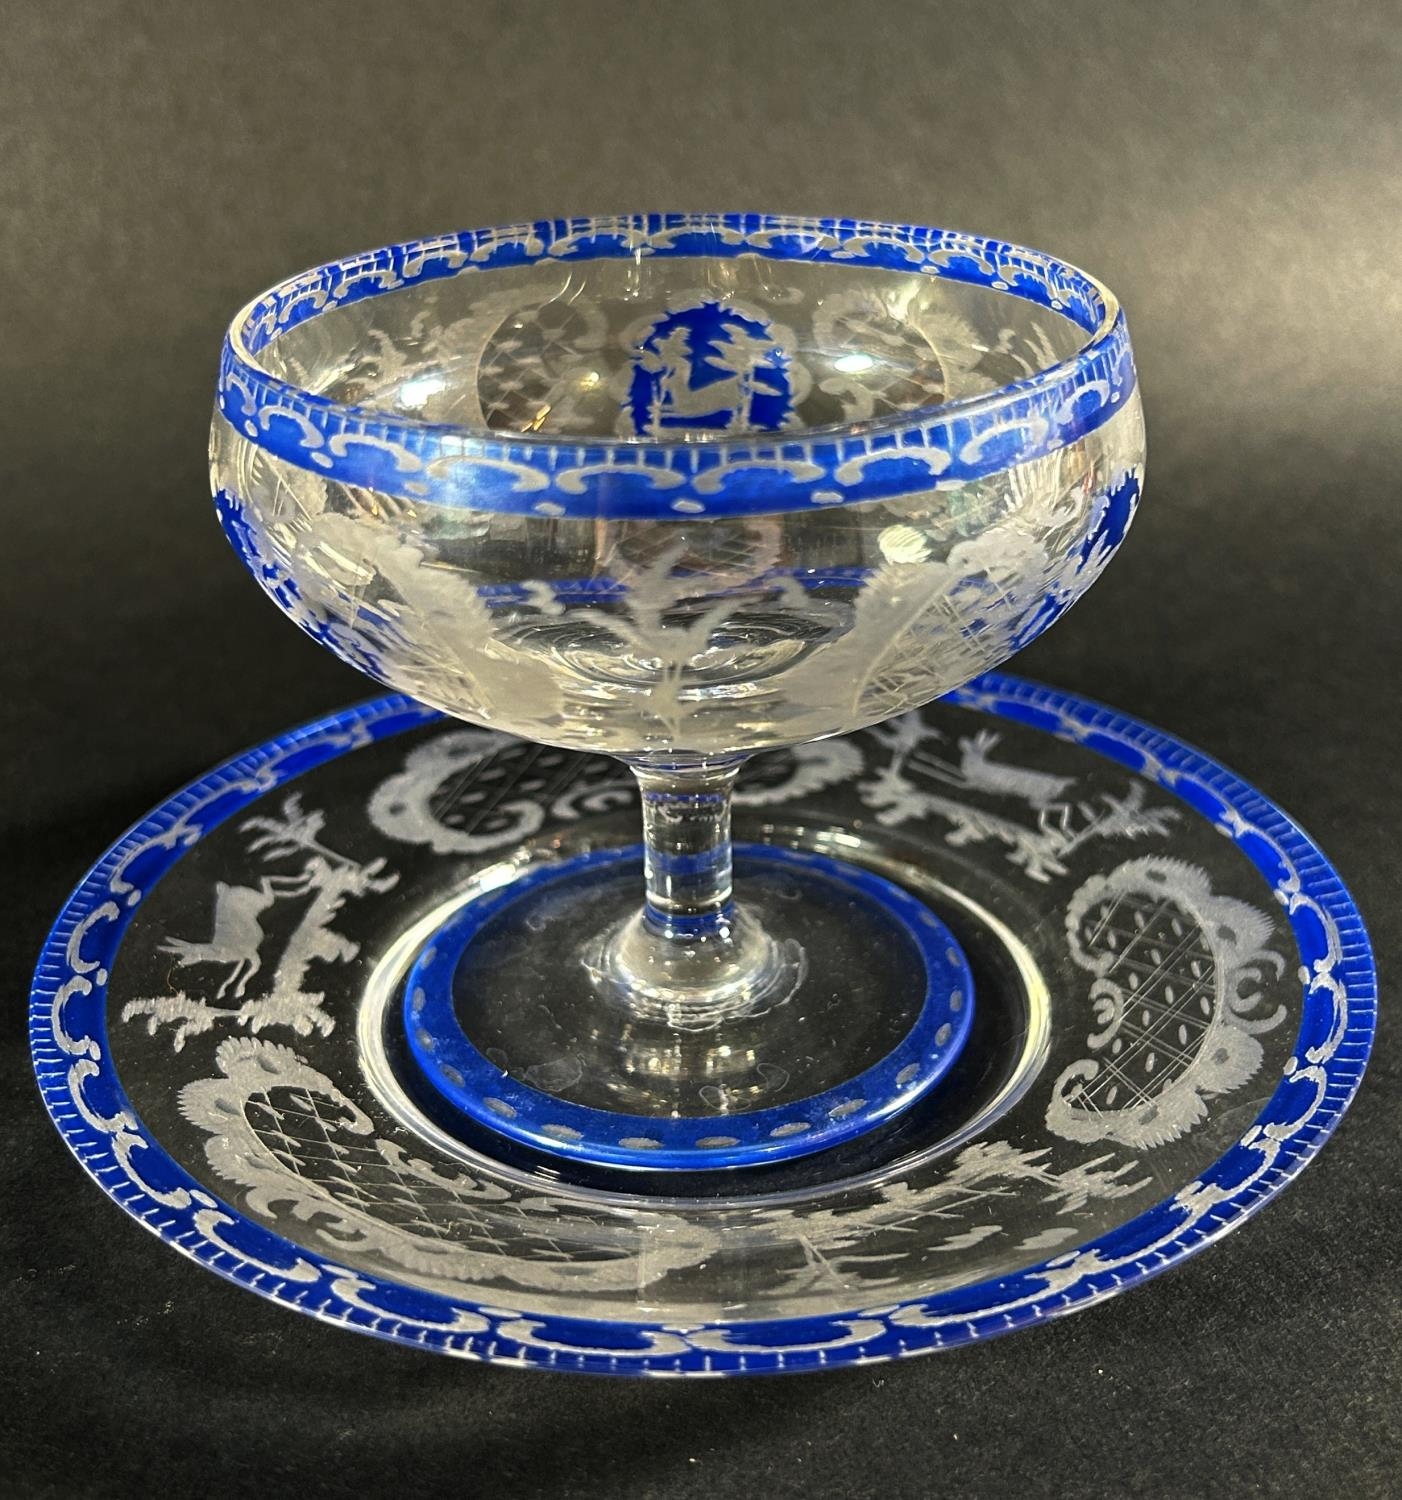 A set of six antique blue etched glass dessert bowls with saucers, with pavilion and deer decoration - Image 3 of 3